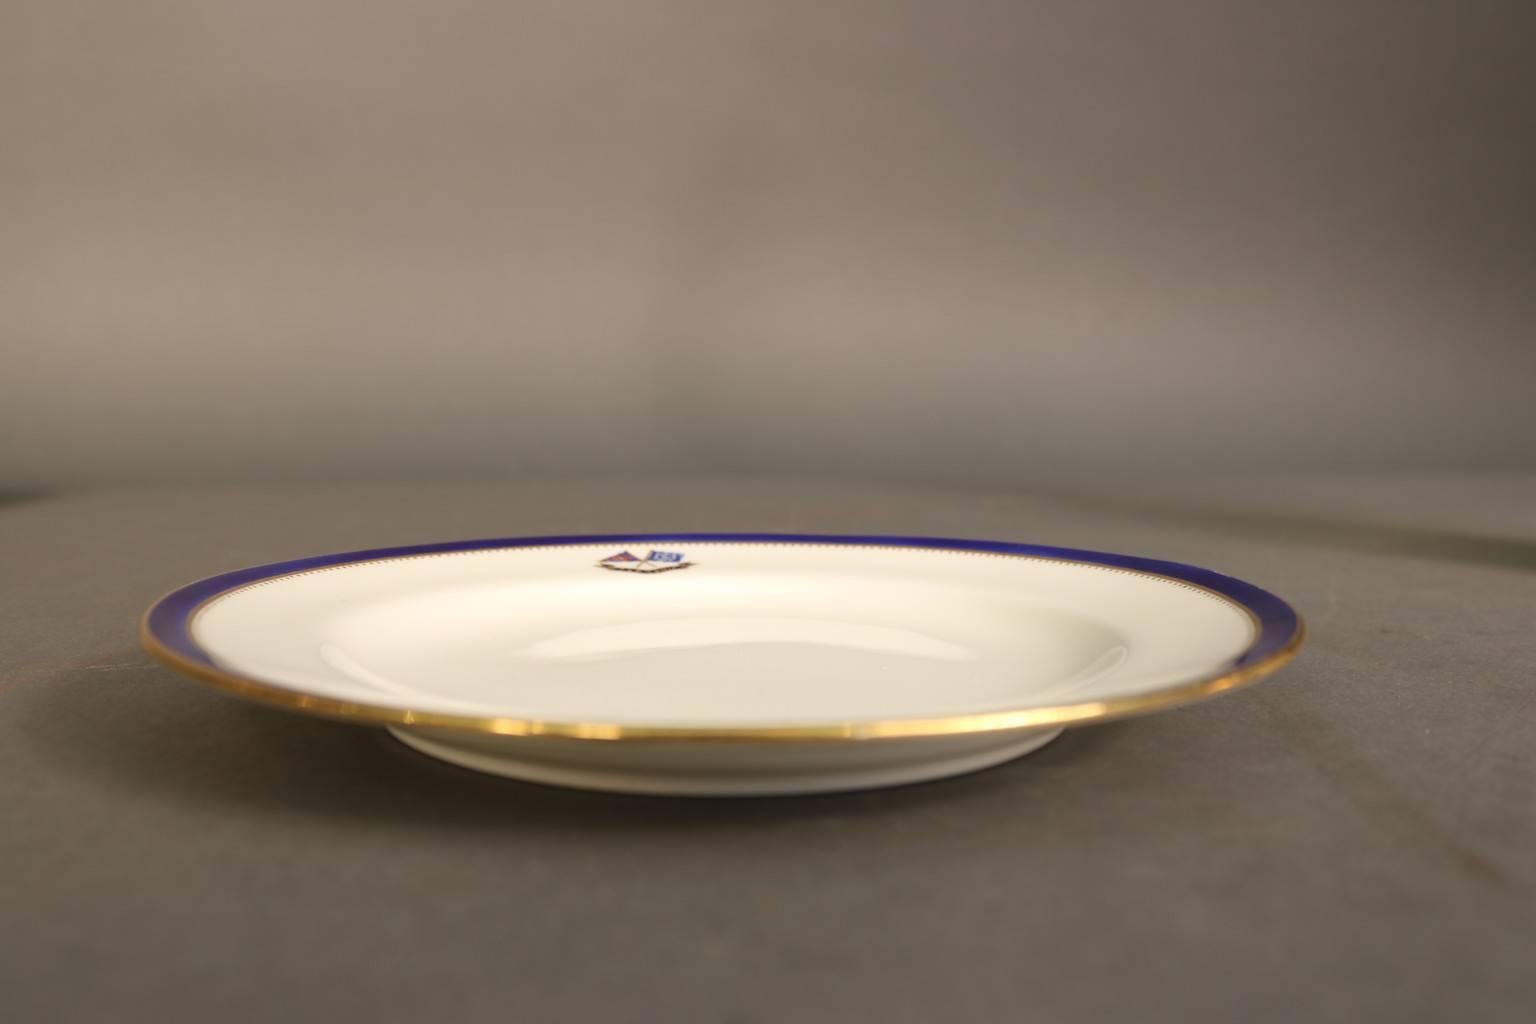 Personal dinnerware made exclusively for J. Pierpont Morgan (1837-1913) for use aboard his personal steam yacht corsair, built in 1890. This 8” Luncheon plate by Minton's has the J. Pierpont Morgan signature navy blue trim with gold accents. Reverse